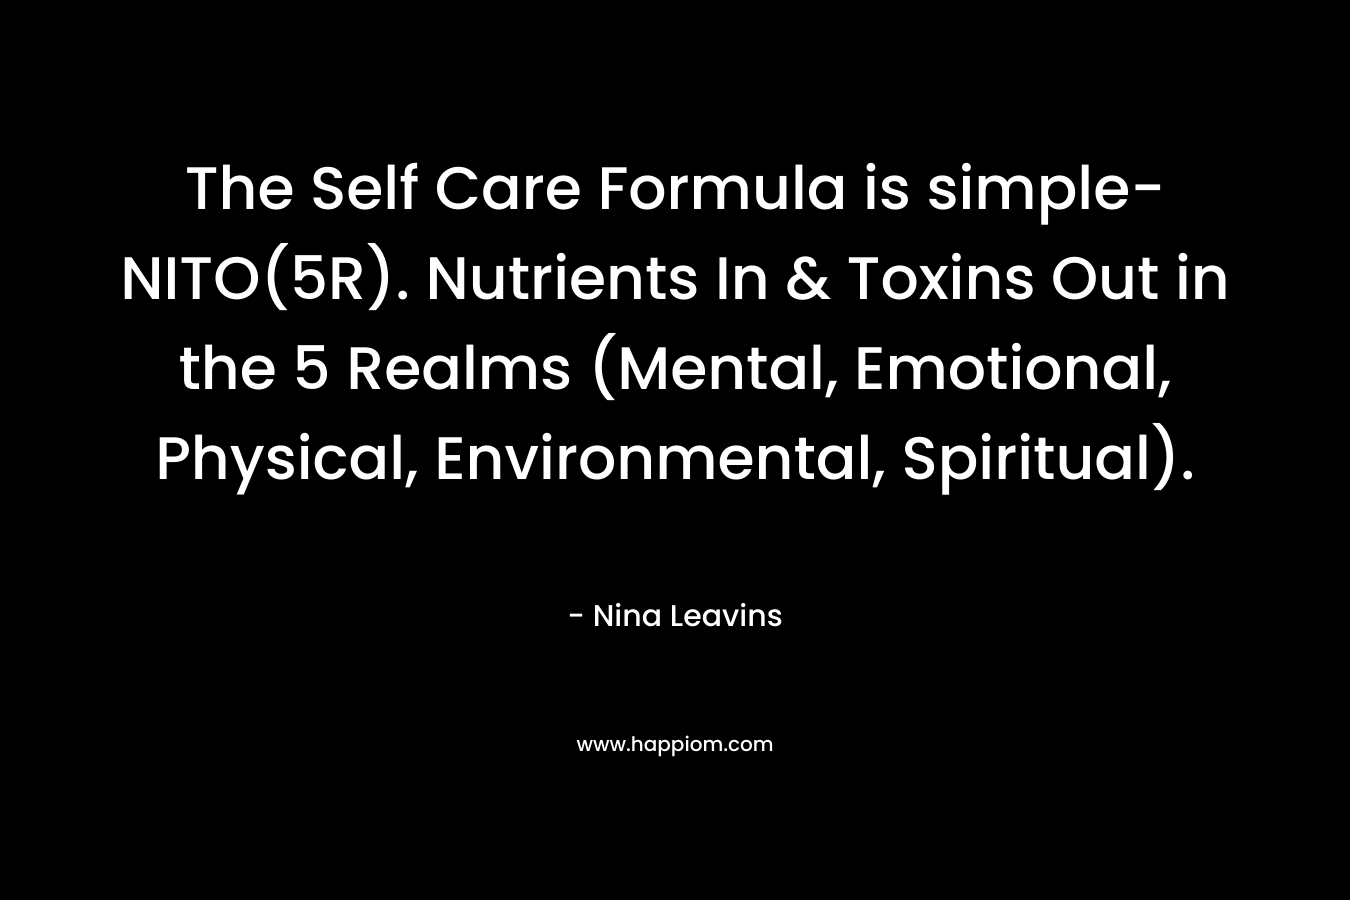 The Self Care Formula is simple-NITO(5R). Nutrients In & Toxins Out in the 5 Realms (Mental, Emotional, Physical, Environmental, Spiritual).